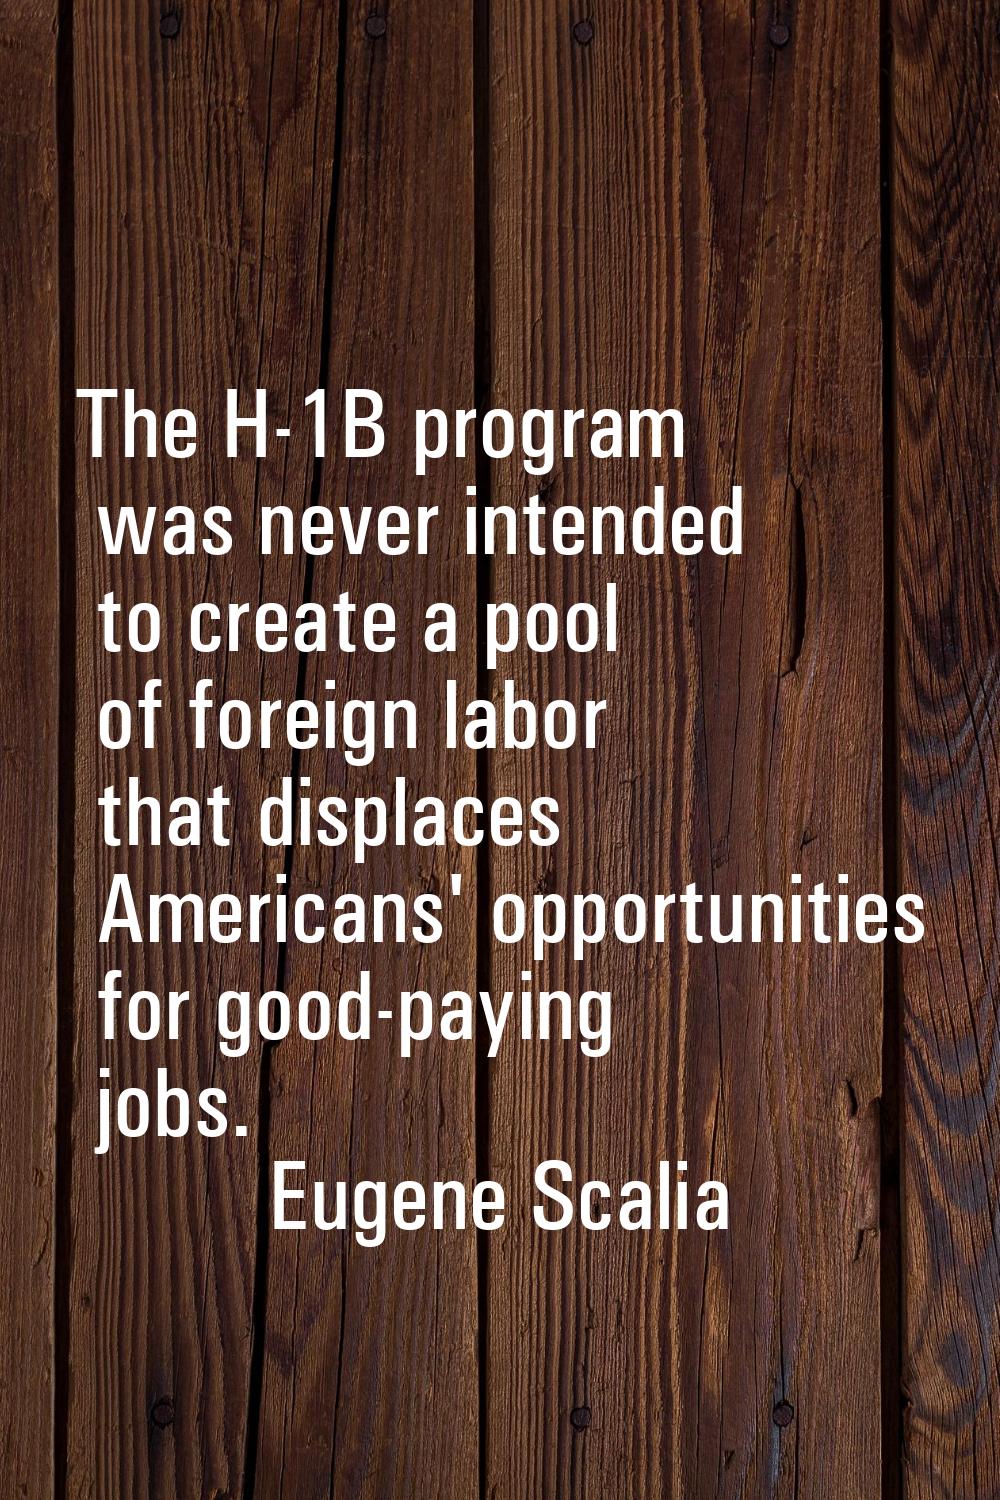 The H-1B program was never intended to create a pool of foreign labor that displaces Americans' opp